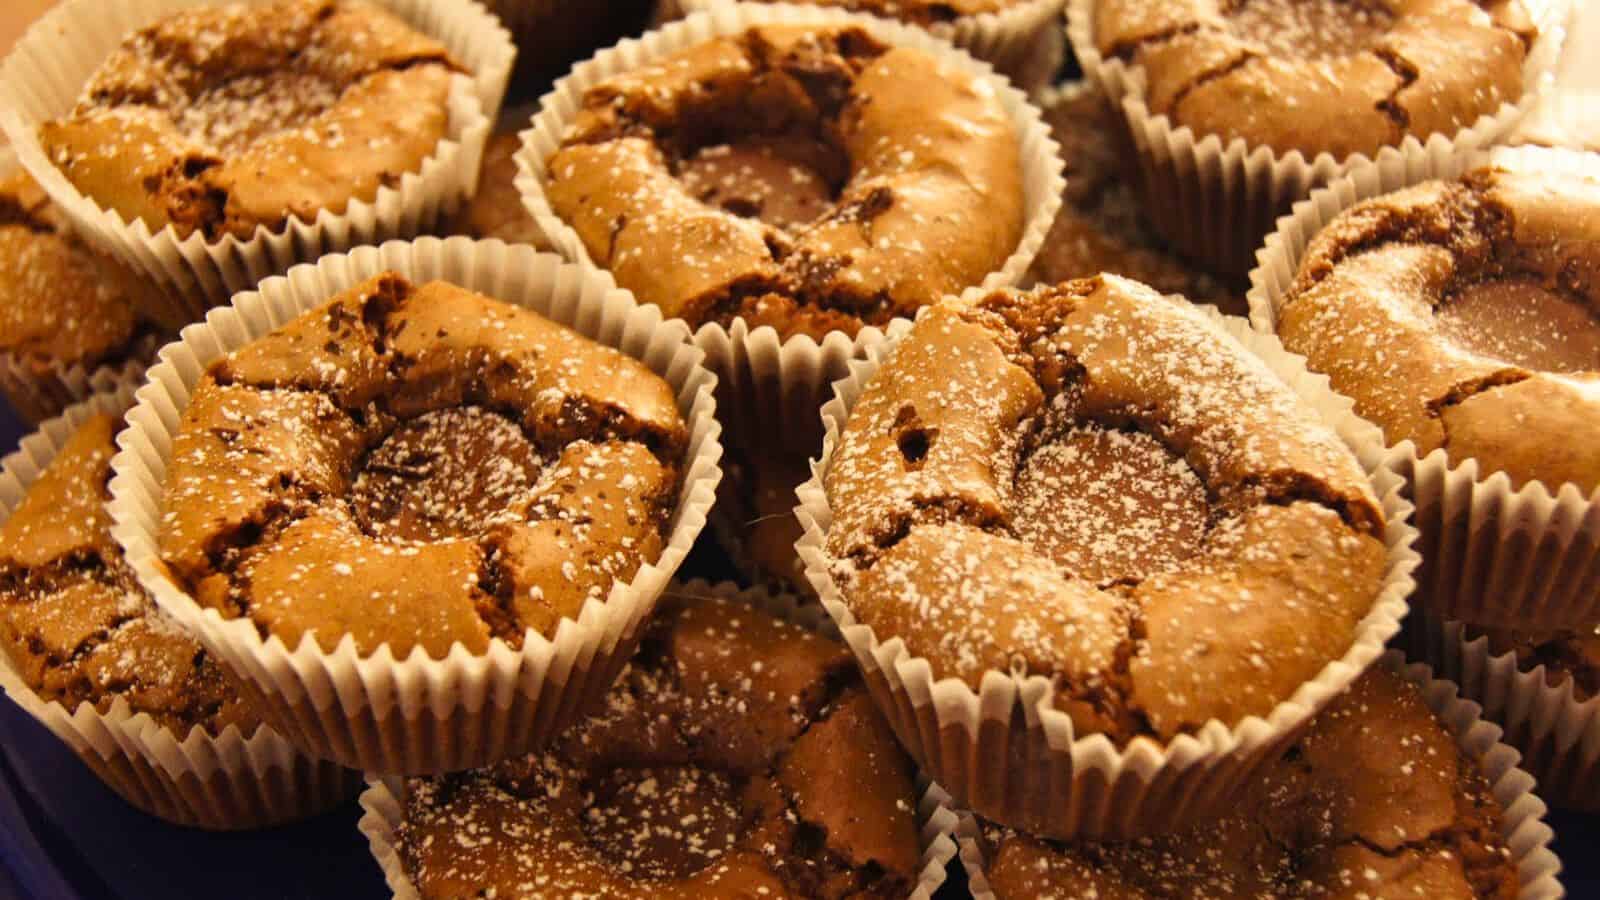 Image shows A close-up image of freshly baked brownies in muffin tins with a surprise in the middle and with a dusting of powdered sugar, placed in brown paper liners.